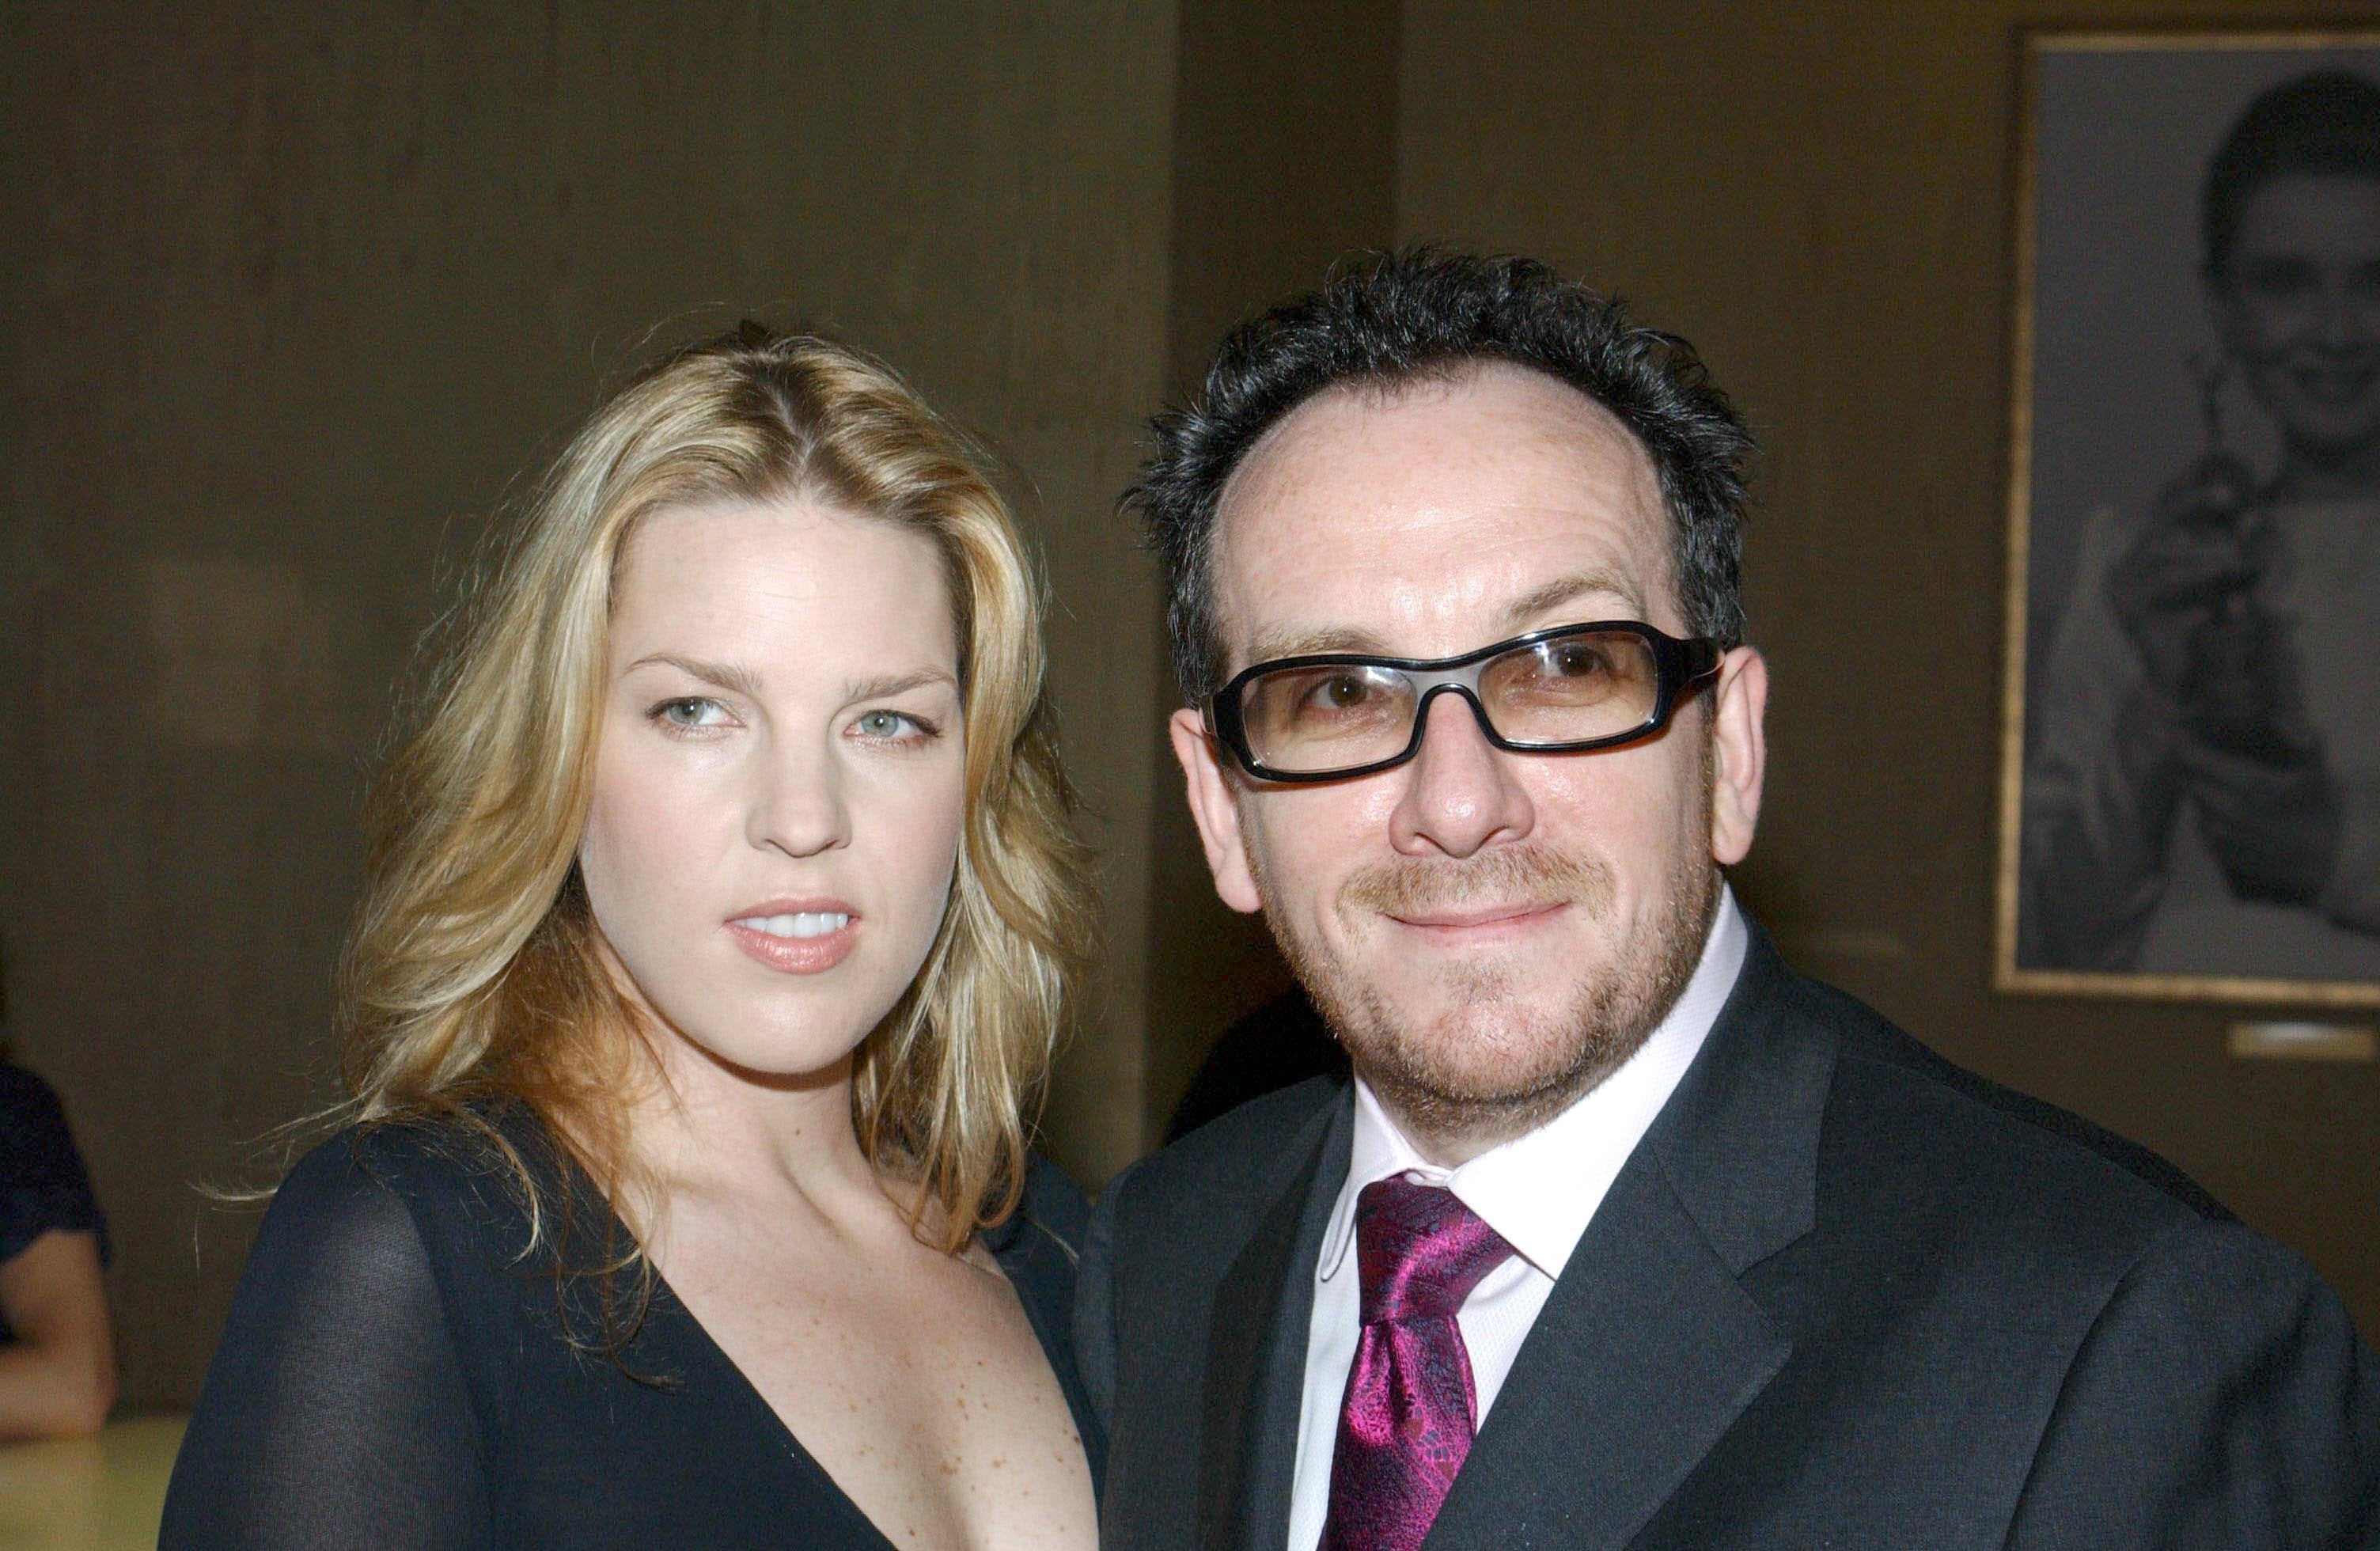 Diana Krall and Elvis Costello in 2002, shortly after they began dating